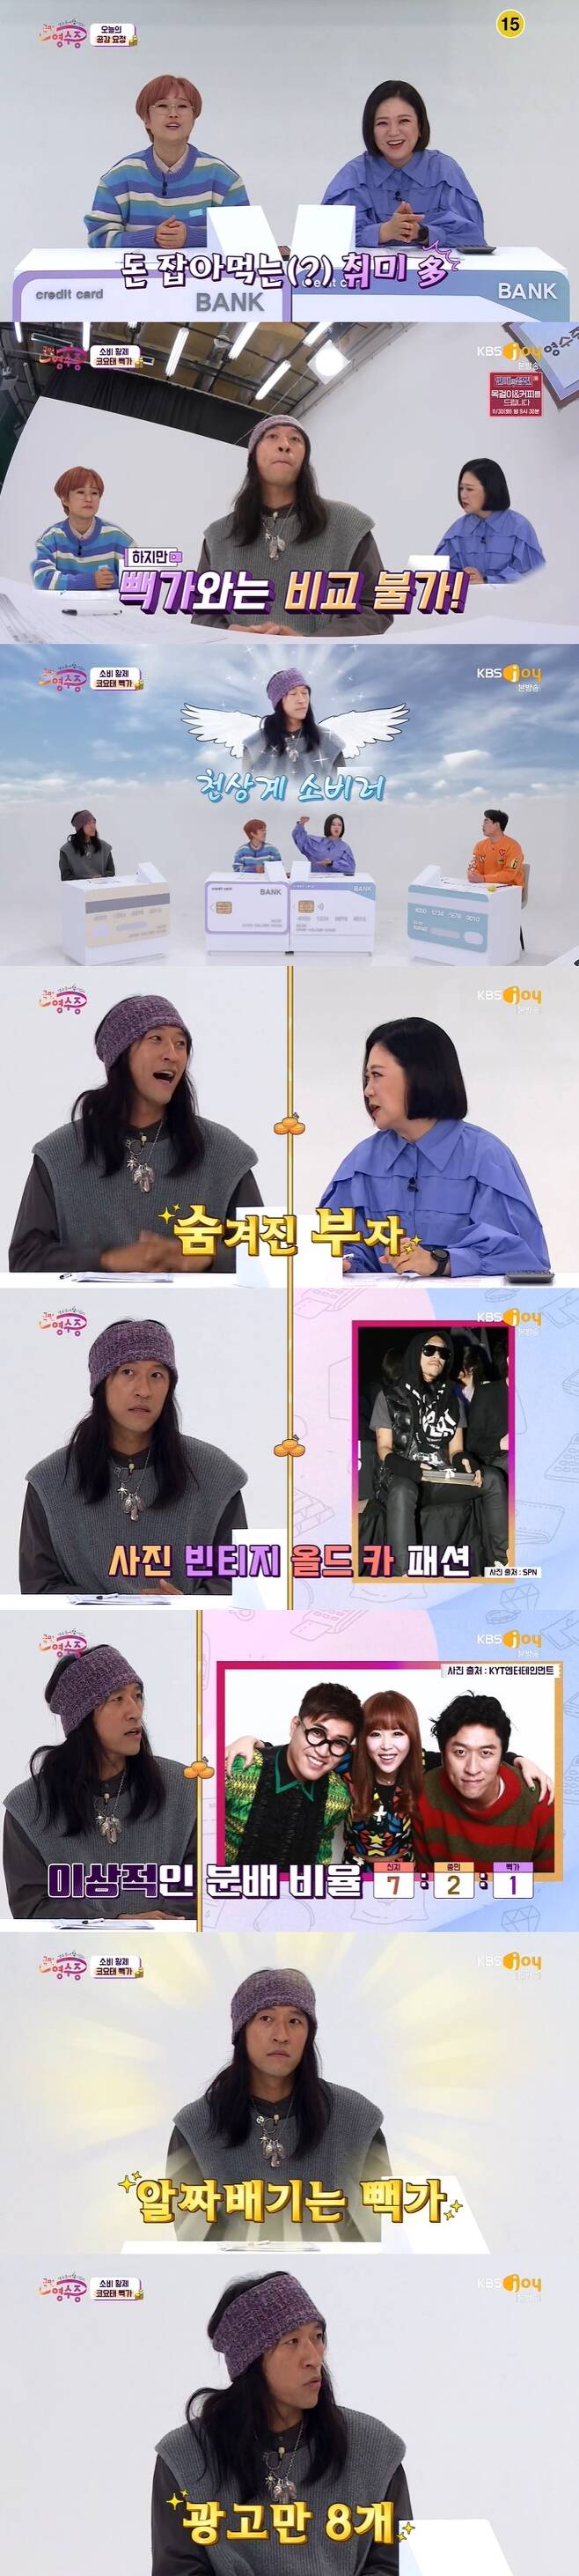 Song Eun-yi, Kim Sook surprised by Consumption pattern of hobby rich DongaOn KBS Joy National Receipt broadcast on November 26, Koyote member Donga appeared as a guest.In the opening, Song Eun-yi said, I like clothes, buy vintage items, collect old cars, take pictures with expensive cameras and camp from time to time.I am so envious, Kim Sook said, it is a real romance. Kim Sook said, I am so envious of you.Kim Sook said, Song Eun-yi and I are very much ridiculed for buying a lot of camping goods around.Compared to this, we are about house play. Referring to Dongas Camping love, The top road of Consumption.He is a rich man who is hidden.When Donga denied it by hand-snapping, Kim Sook explained, Its a sour note: hes the emperor of Consumption beyond his breath (hidden rich).Young Jin Park laughed, pointing out, I do not like the bullshit. I do not like the color itself.Song Eun-yi joked, Im sorry, but see Tarot, and Kim Sook also said, Are you with hair bands and hair?Donga has a variety of hobbies such as photography, vintage collection, old car, fashion, as well as camping, but he did not care about Koyote album revenue.Asked if he had lost any of his recent single albums, Donga said that Shin Ji is in charge of the entire Koyote business. Shin Ji, Jongmin is my brother, I divide 4 to 3.If it is the original, 4:3:3 does not make sense and 7:2:1 is good. Kim Sook said, Mr. Kim Jong-min and Mr. Shin Ji seem to be doing a lot of activities, so I think they will make a lot of money, but the net excretion is Mr. Donga.Weve been doing a lot of advertising for years, Donga said. Weve been doing eight models.I think were seeing the light now that the model were working on is an extension of what weve been doing for a long time, he said.Young Jin Park asked Donga, who runs seven businesses, Its not all business is done, is there anything you can say?Donga recently revealed the story of Bitcoin, which was based on his close brothers words, saying, It is called a loss around you.On the secret to managing money, Donga said, I dont do any savings or deposits. I like to have a Aritz Aduriz in cash at home.The location is a secret, said Aritz Aduriz.Prior to the Receipt analysis time, Donga said, I want to go to my favorite house, and I want to have a room in Portland, Bangkok and Copenhagen, which I like.Surprised by the extraordinary size of the goal, Song Eun-yi and Kim Sook mentioned Dongas 4th floor luxury villa, which also appeared in the drama The World of Couples.Receipt analysis began and Kim Sook introduced the details of the vintage posters collected as hobbies, which were displayed at the gallery exhibition and spent on frame work.I made a lot of money from this, Donga said. I collected posters designed by Steve Jobs in the 1980s and 1990s.I sold it because there were so many places to keep it at home, but it was almost all sold and it was profitable.When the details of the $ 71.74 use of Tent were released in September, Kim Sook said, I know that there are about 400 Tents in Mr. Dongas house.Donga was embarrassed by Kim Sooks exaggeration, but said, There were about 150 really.I want to sell too much, so I have about 100 left. When Young Jin Park said, If you have one body, you only need one Tent, Donga said, adding that Song Eun-yi and Kim Sook are included in addition to himself.Song Eun-yi was embarrassed that I have only 10 (Tent) and Kim Sook said I have 12.Donga also unveiled Consumption during motto camping in Jeju Island in September.In the last year, I rented a car in La and spent three weeks camping for about 8,000 kilometers to Grand Canyon, Nevada, Salt Lake City and Portland, said Donga, who mainly enjoys Nogie Camping.Donga was spending about 660,000 won on several bike insurance.I need an off-road, downtown, and long-distance bike, Donga said, but now Ive got three left in order, and the bike makes me a natural.Young Jin Park said, The bike itself is a machine, but what kind of natural person is it?